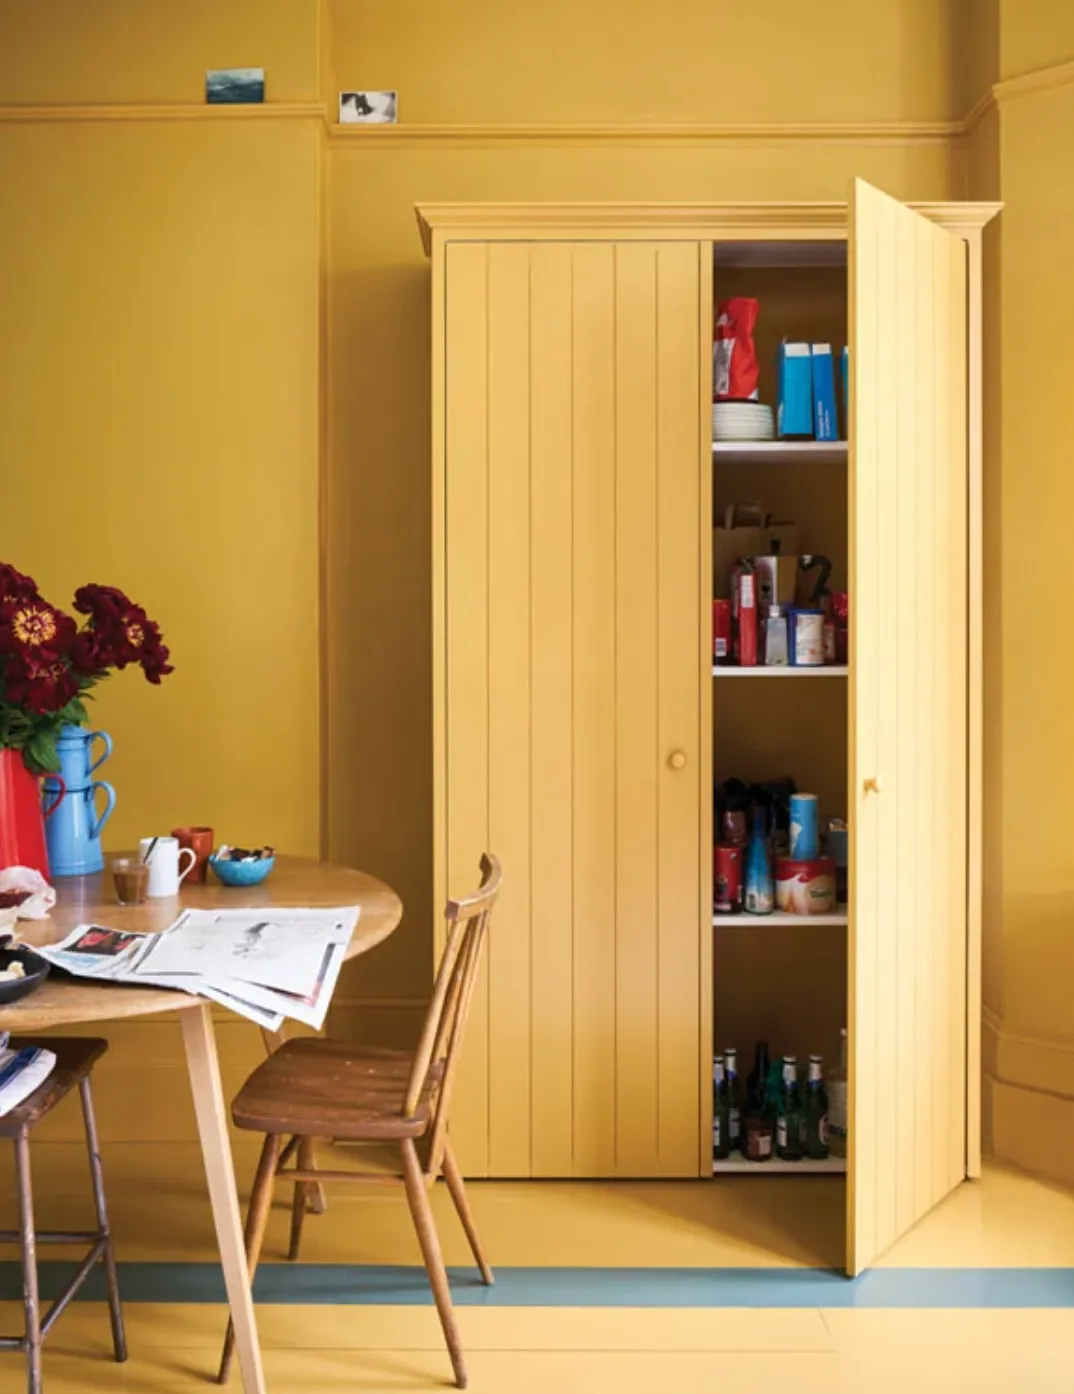 Farrow and Ball India Yellow No.66 Estate Emulsion and Down Pipe No.26 Modern Emulsion